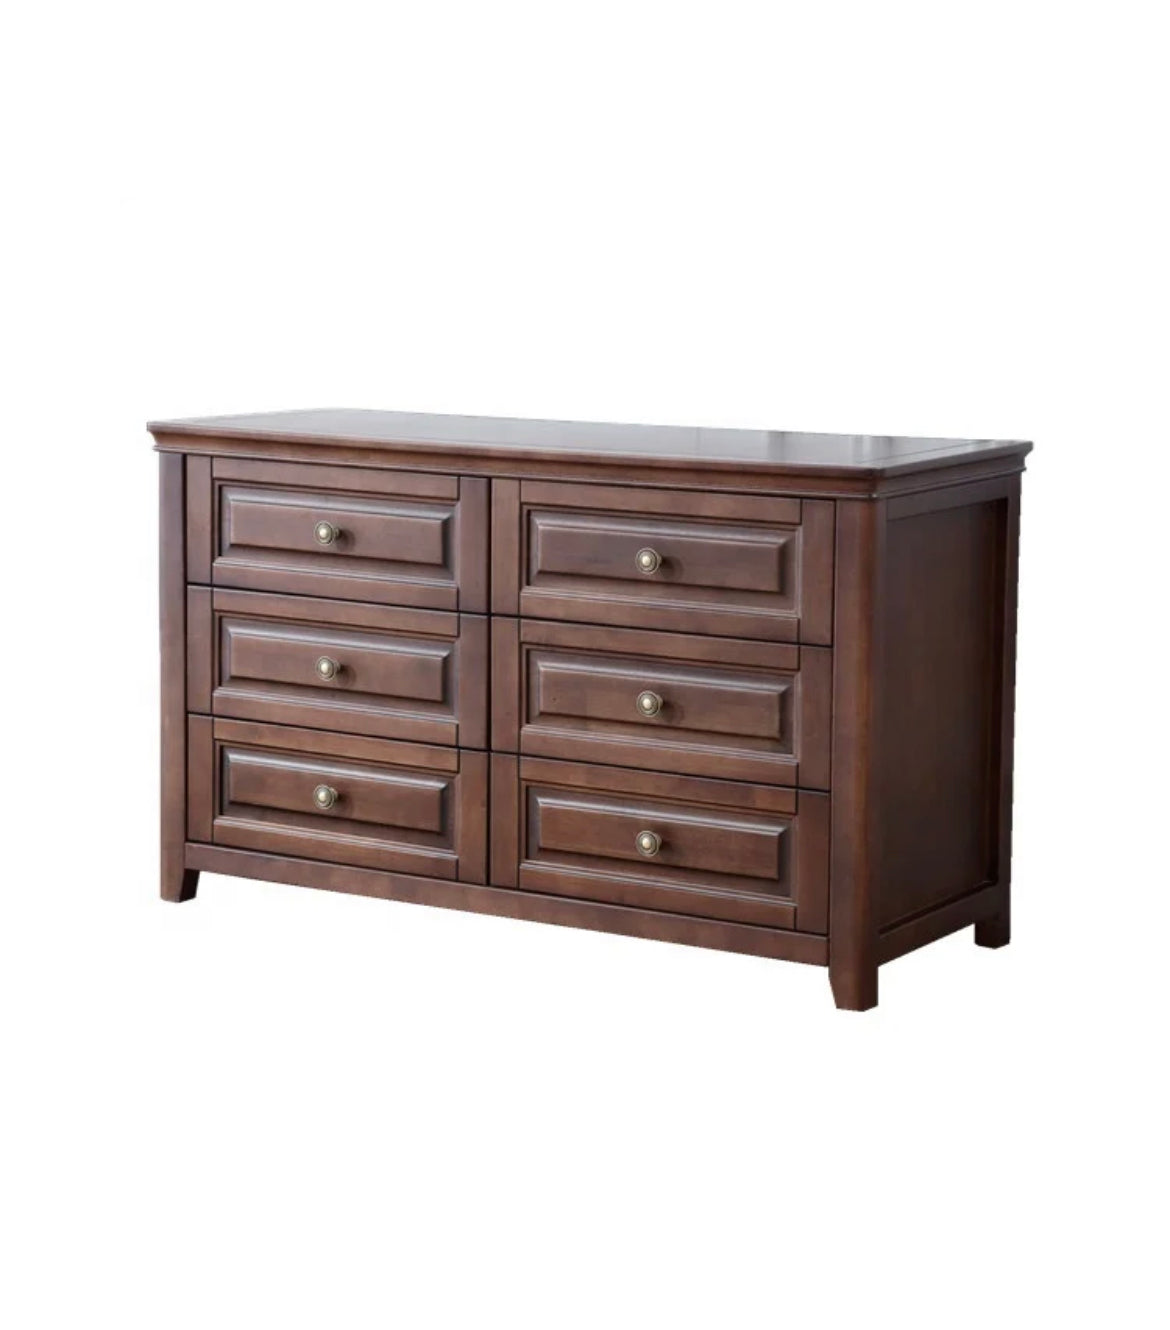 Cabinets America Rural Style Storable Walnut Color Living Room Furniture Solid Wood Cabinet